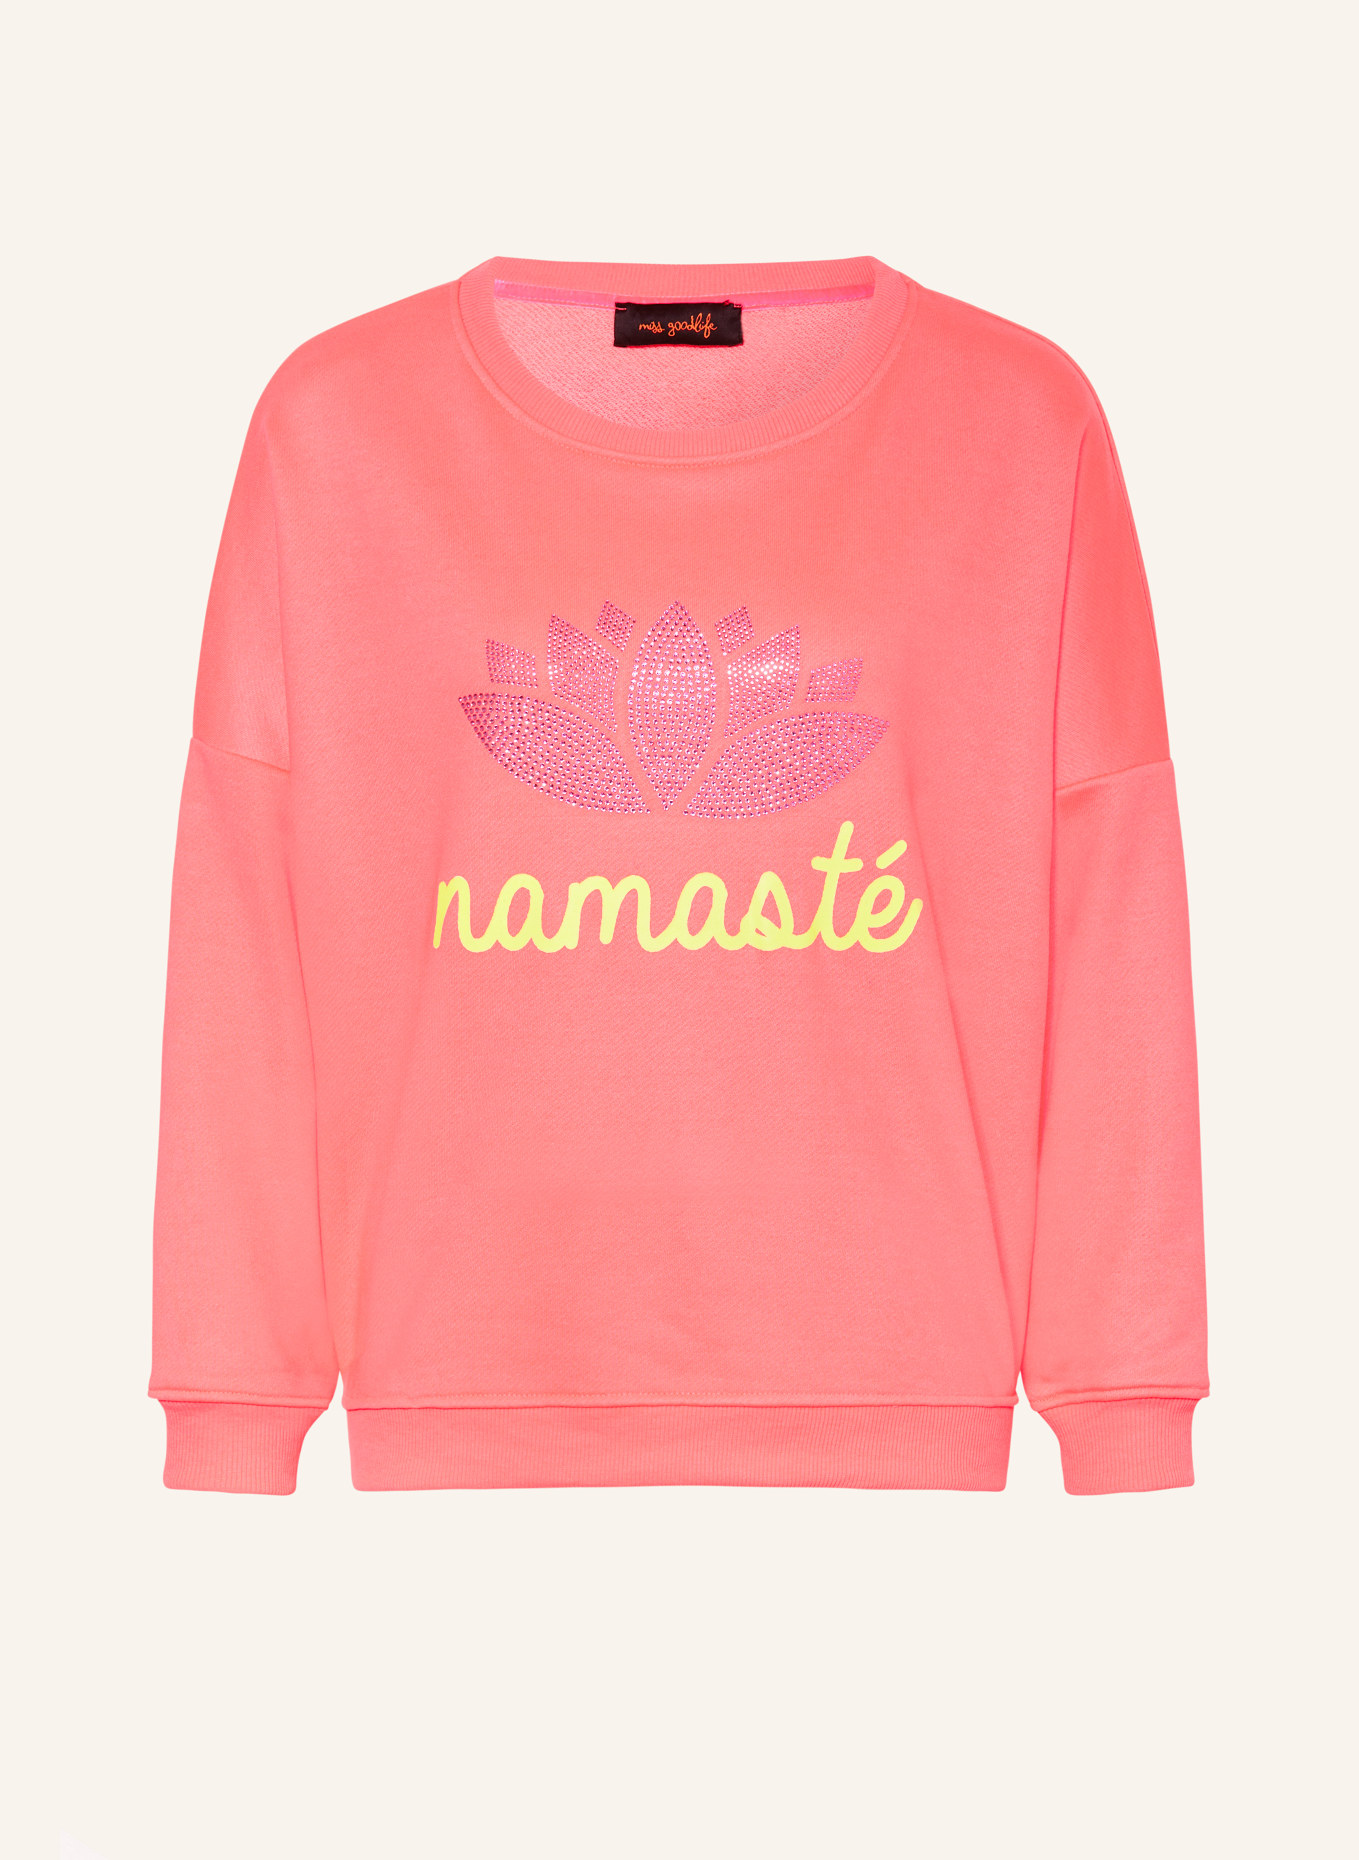 miss goodlife Sweatshirt with decorative gems, Color: NEON PINK/ NEON YELLOW (Image 1)